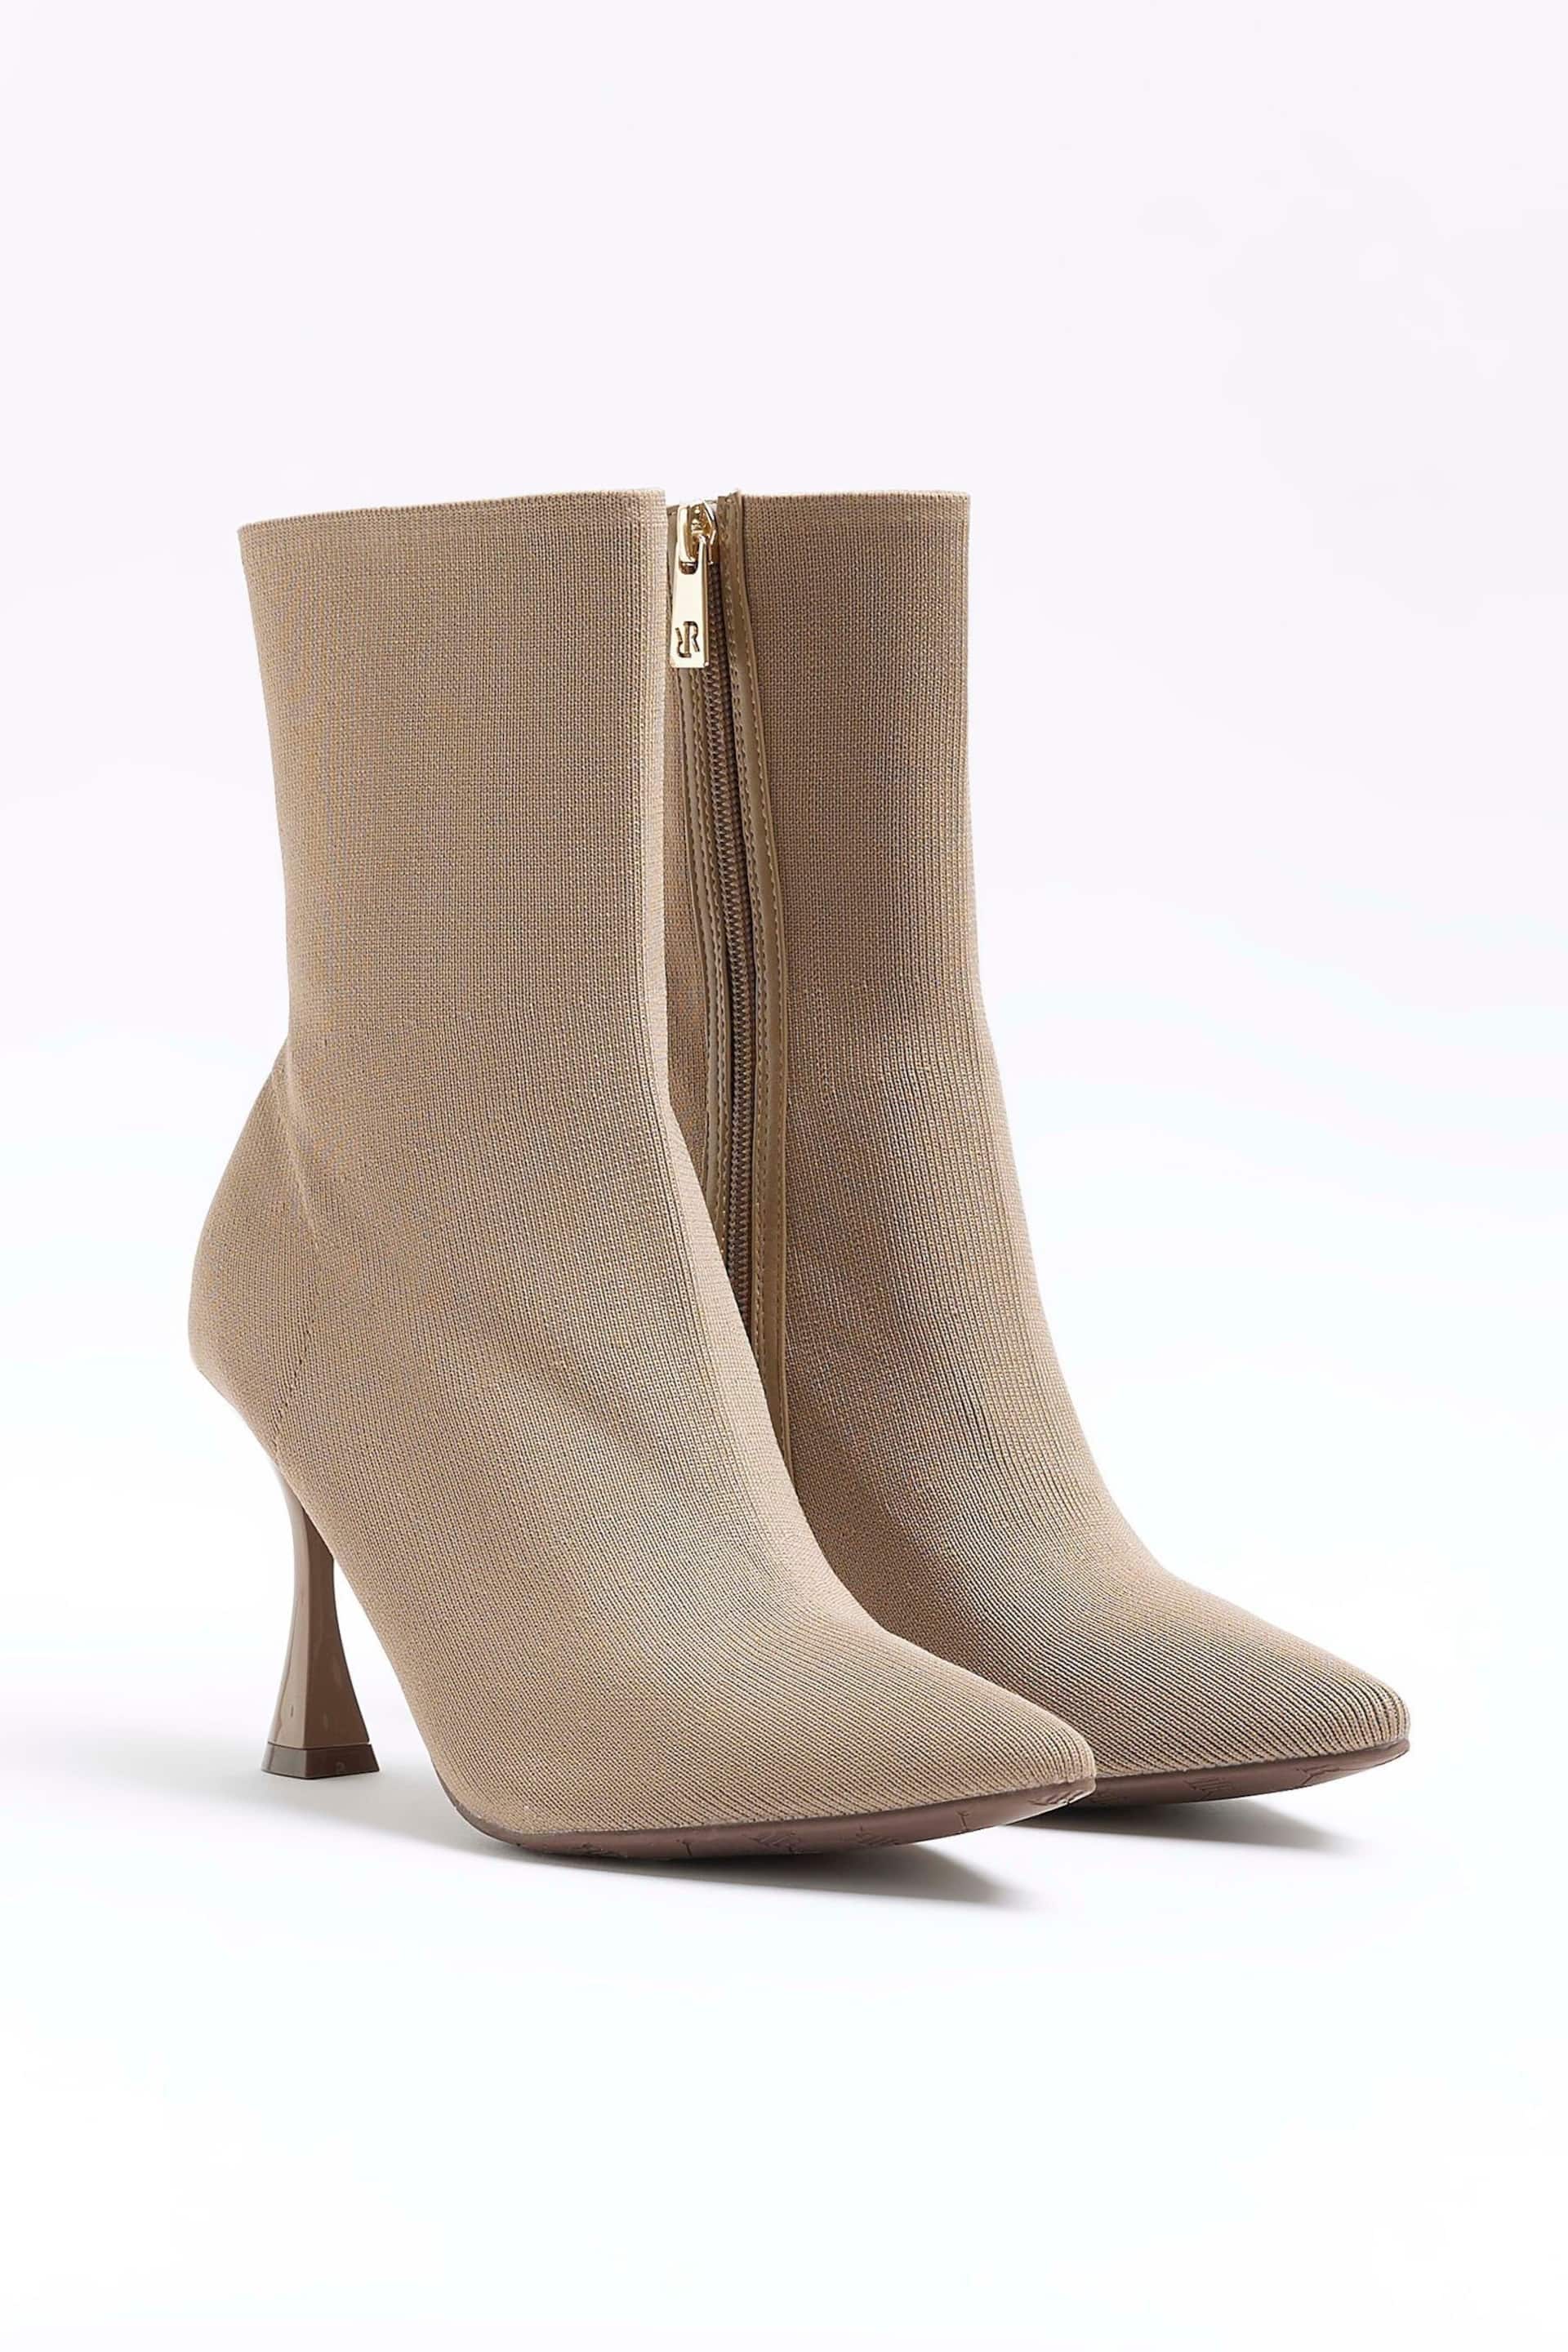 River Island Brown Knitted Point Ankle Boots - Image 3 of 6